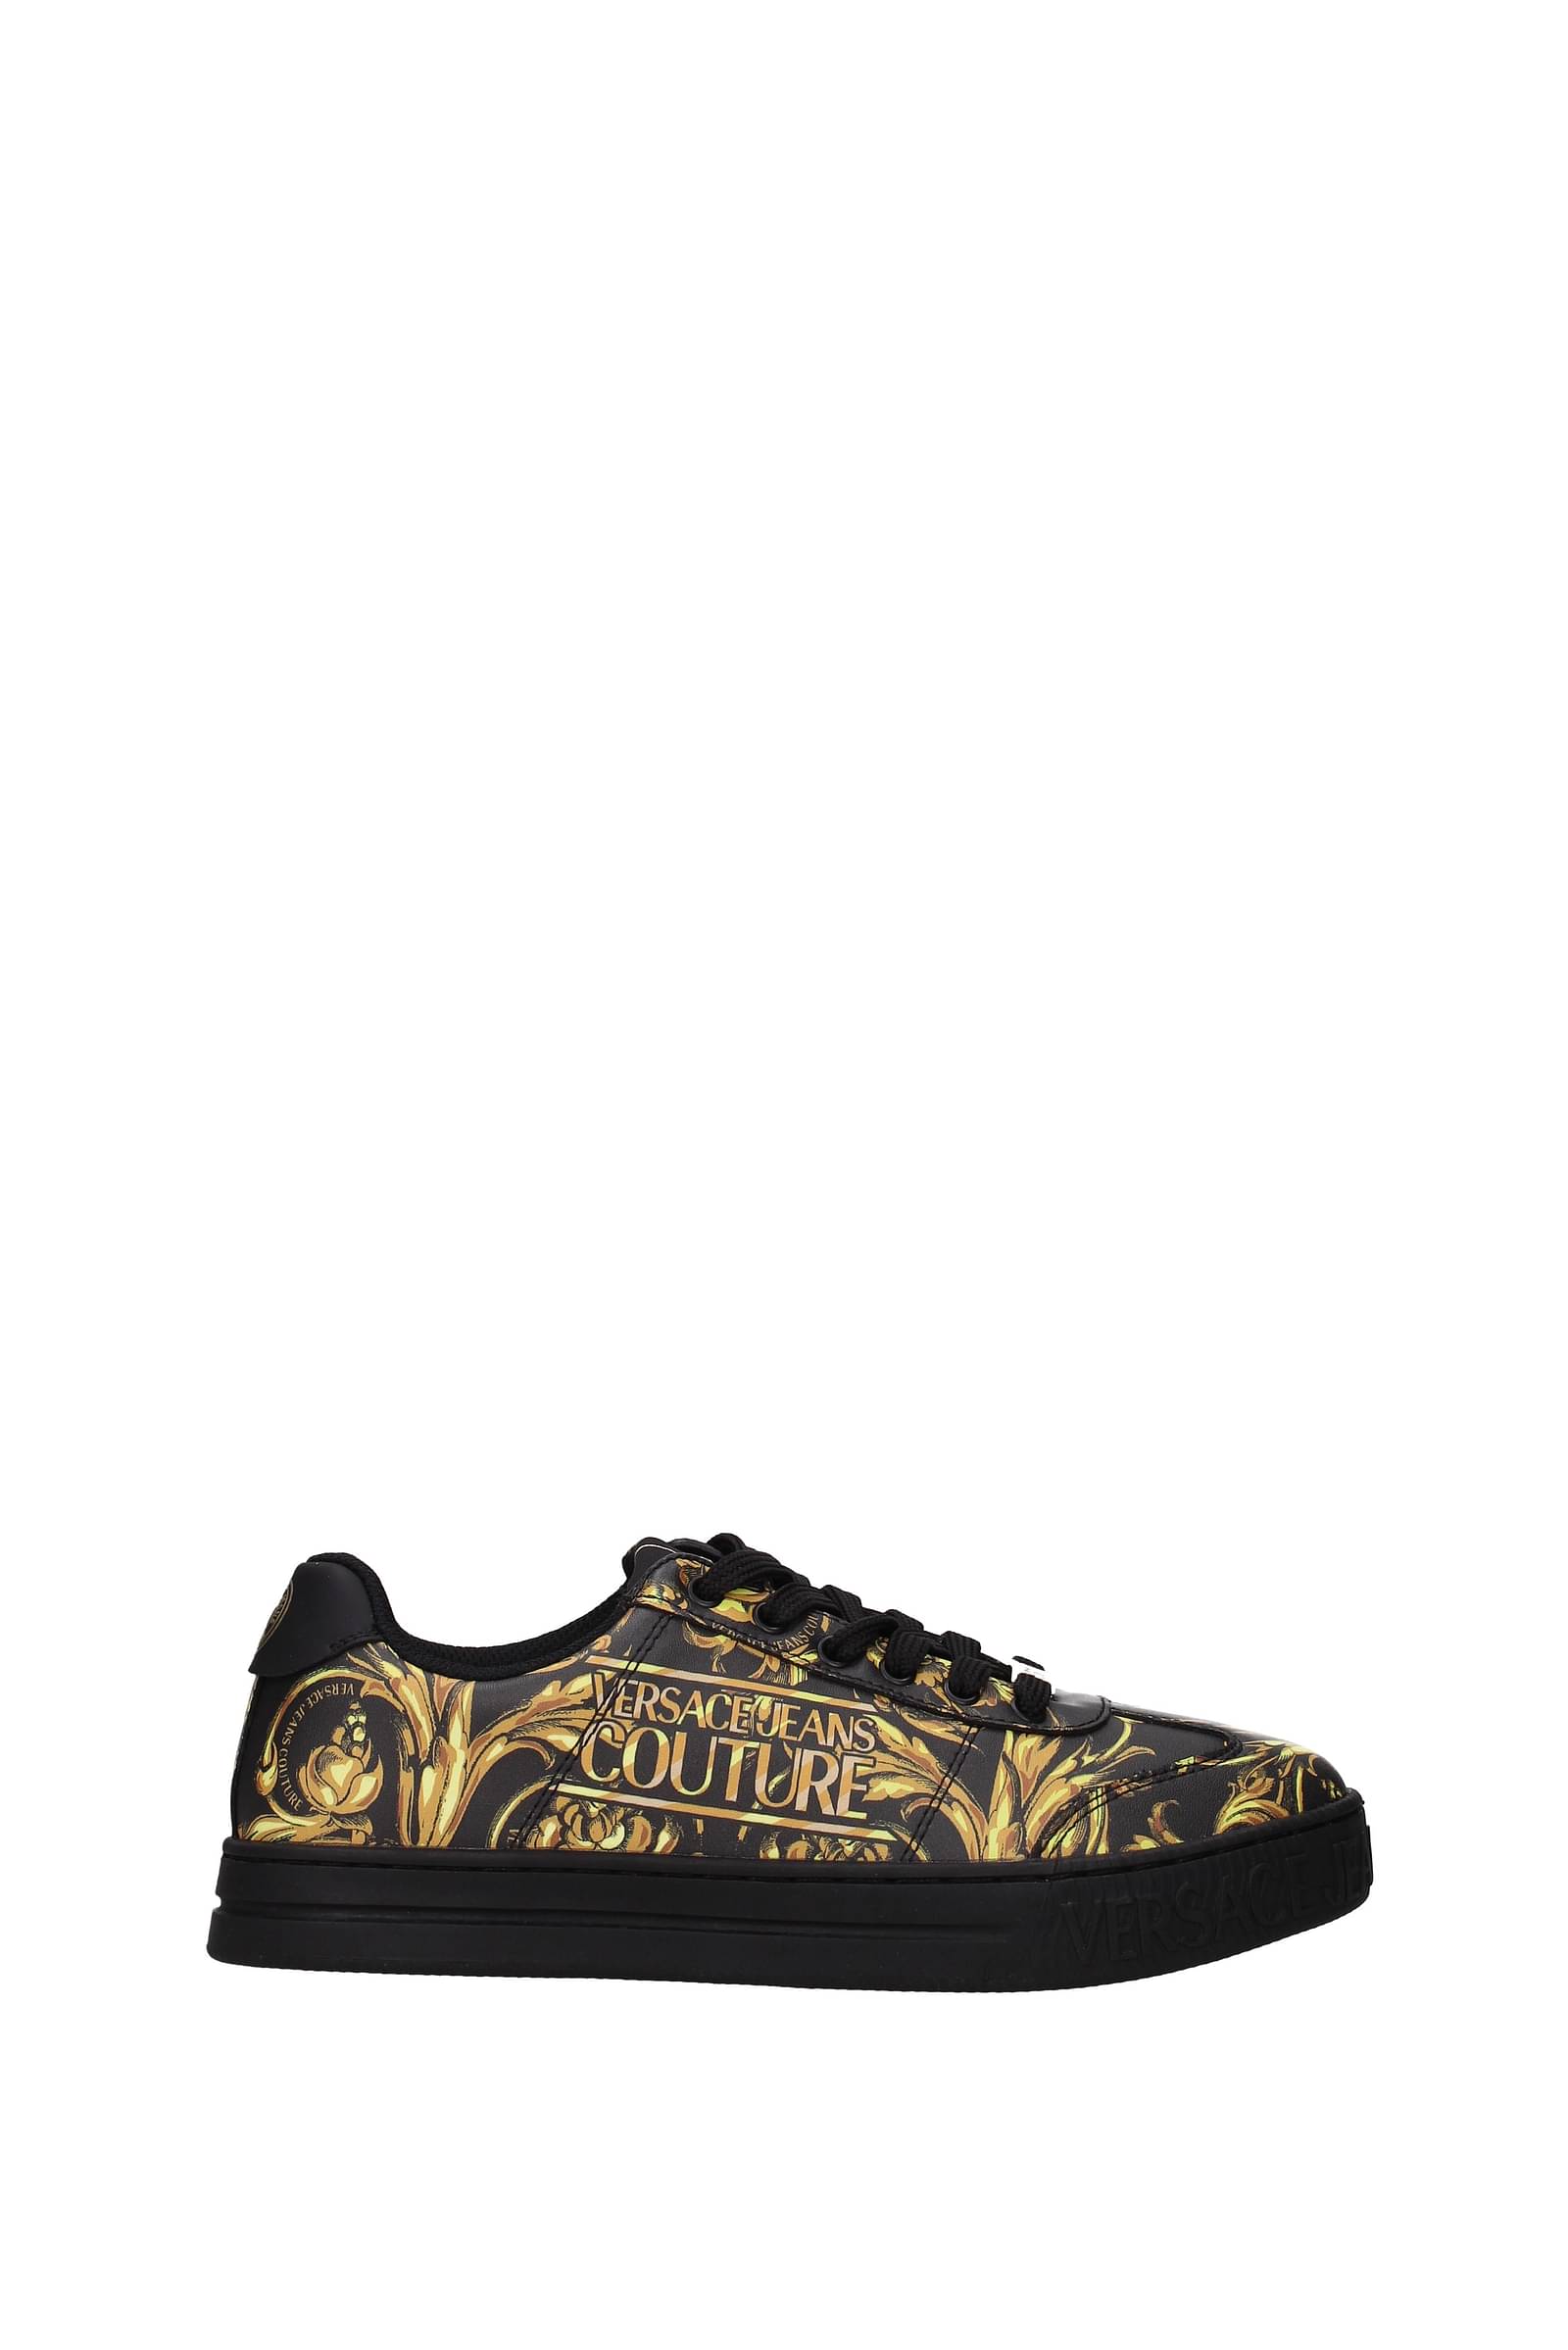 versace black and gold sneakers